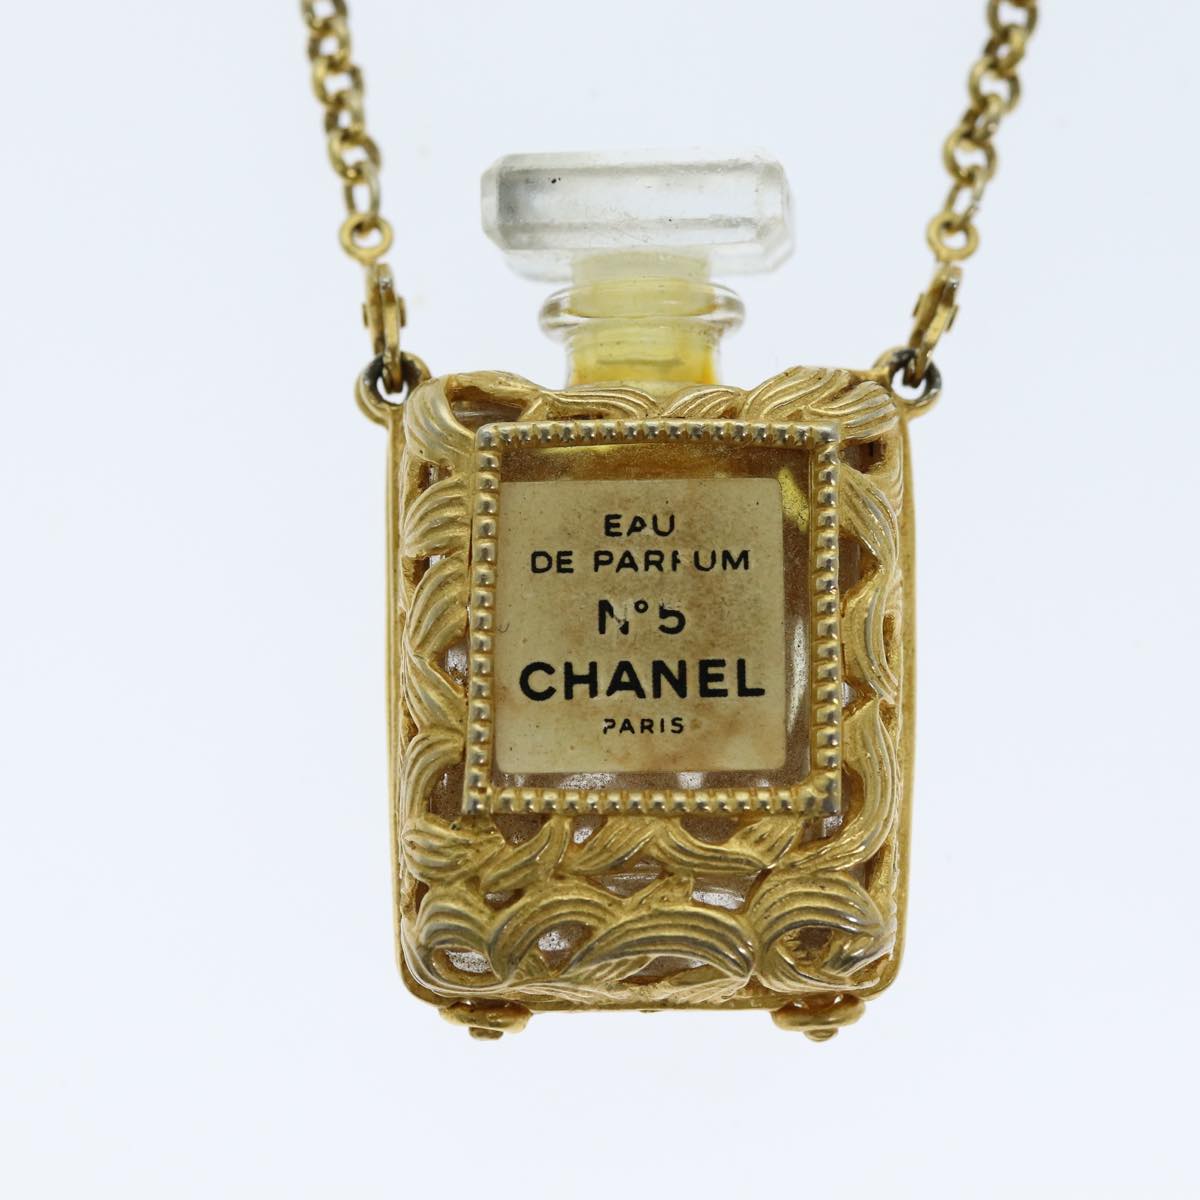 CHANEL Perfume N°5 Necklace metal Gold CC Auth bs13939